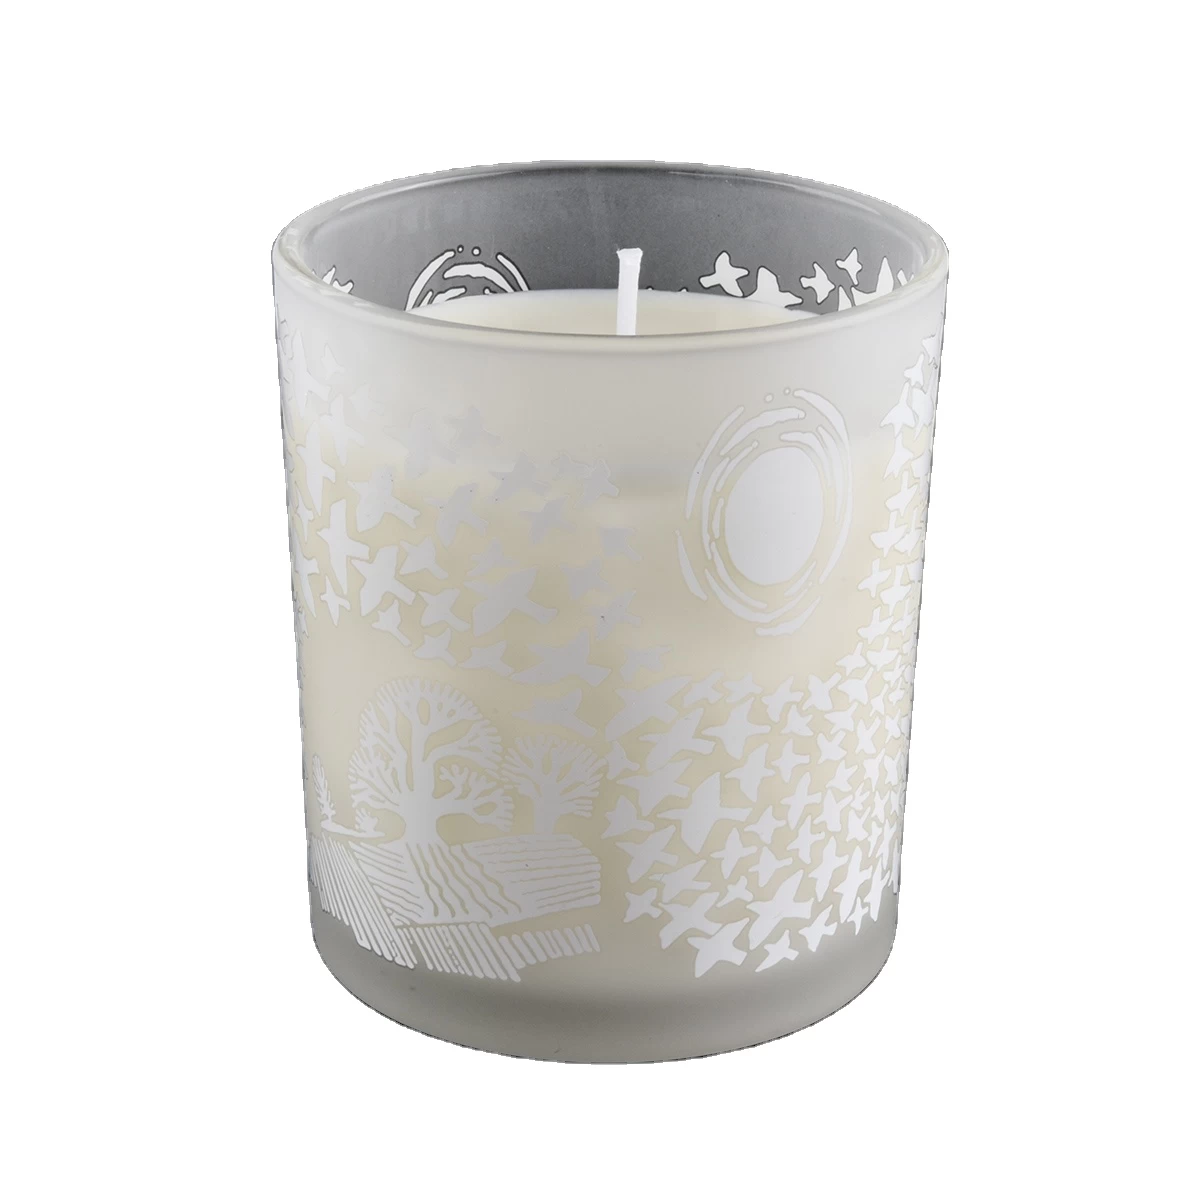 Frosted glass candle jar with printing